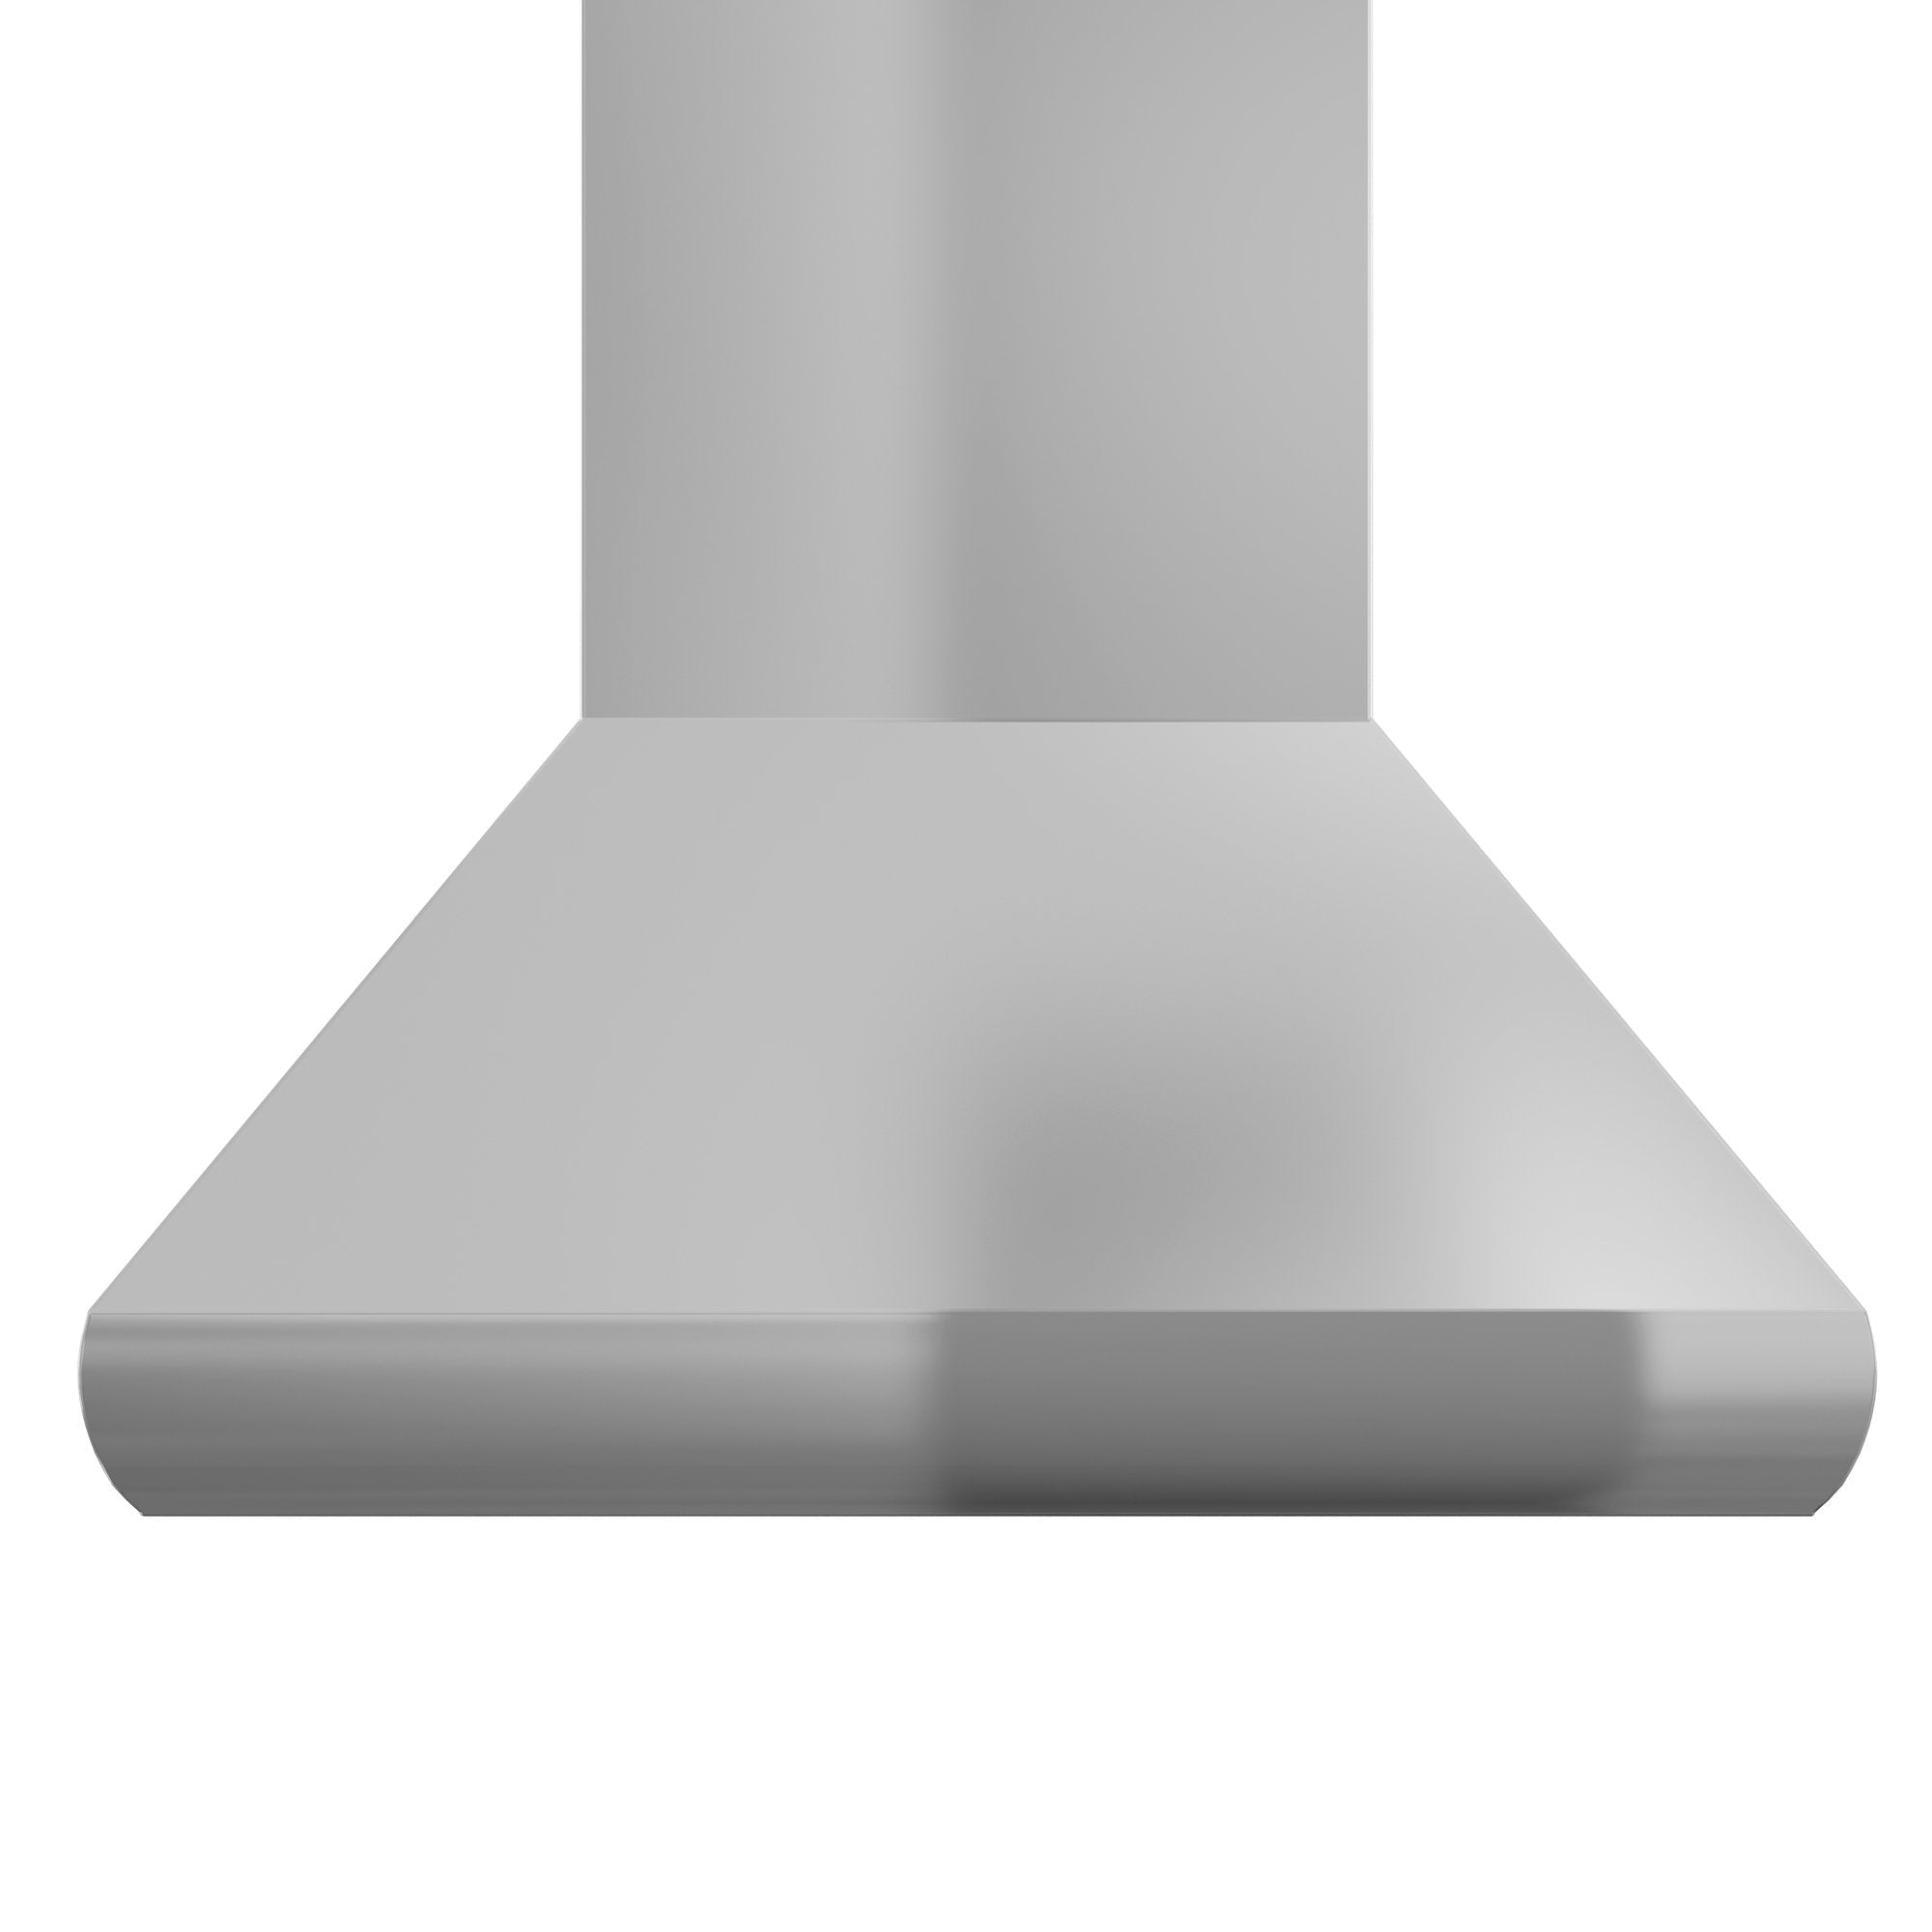 ZLINE 48" Professional Ducted Wall Mount Range Hood in Stainless Steel (687-48)